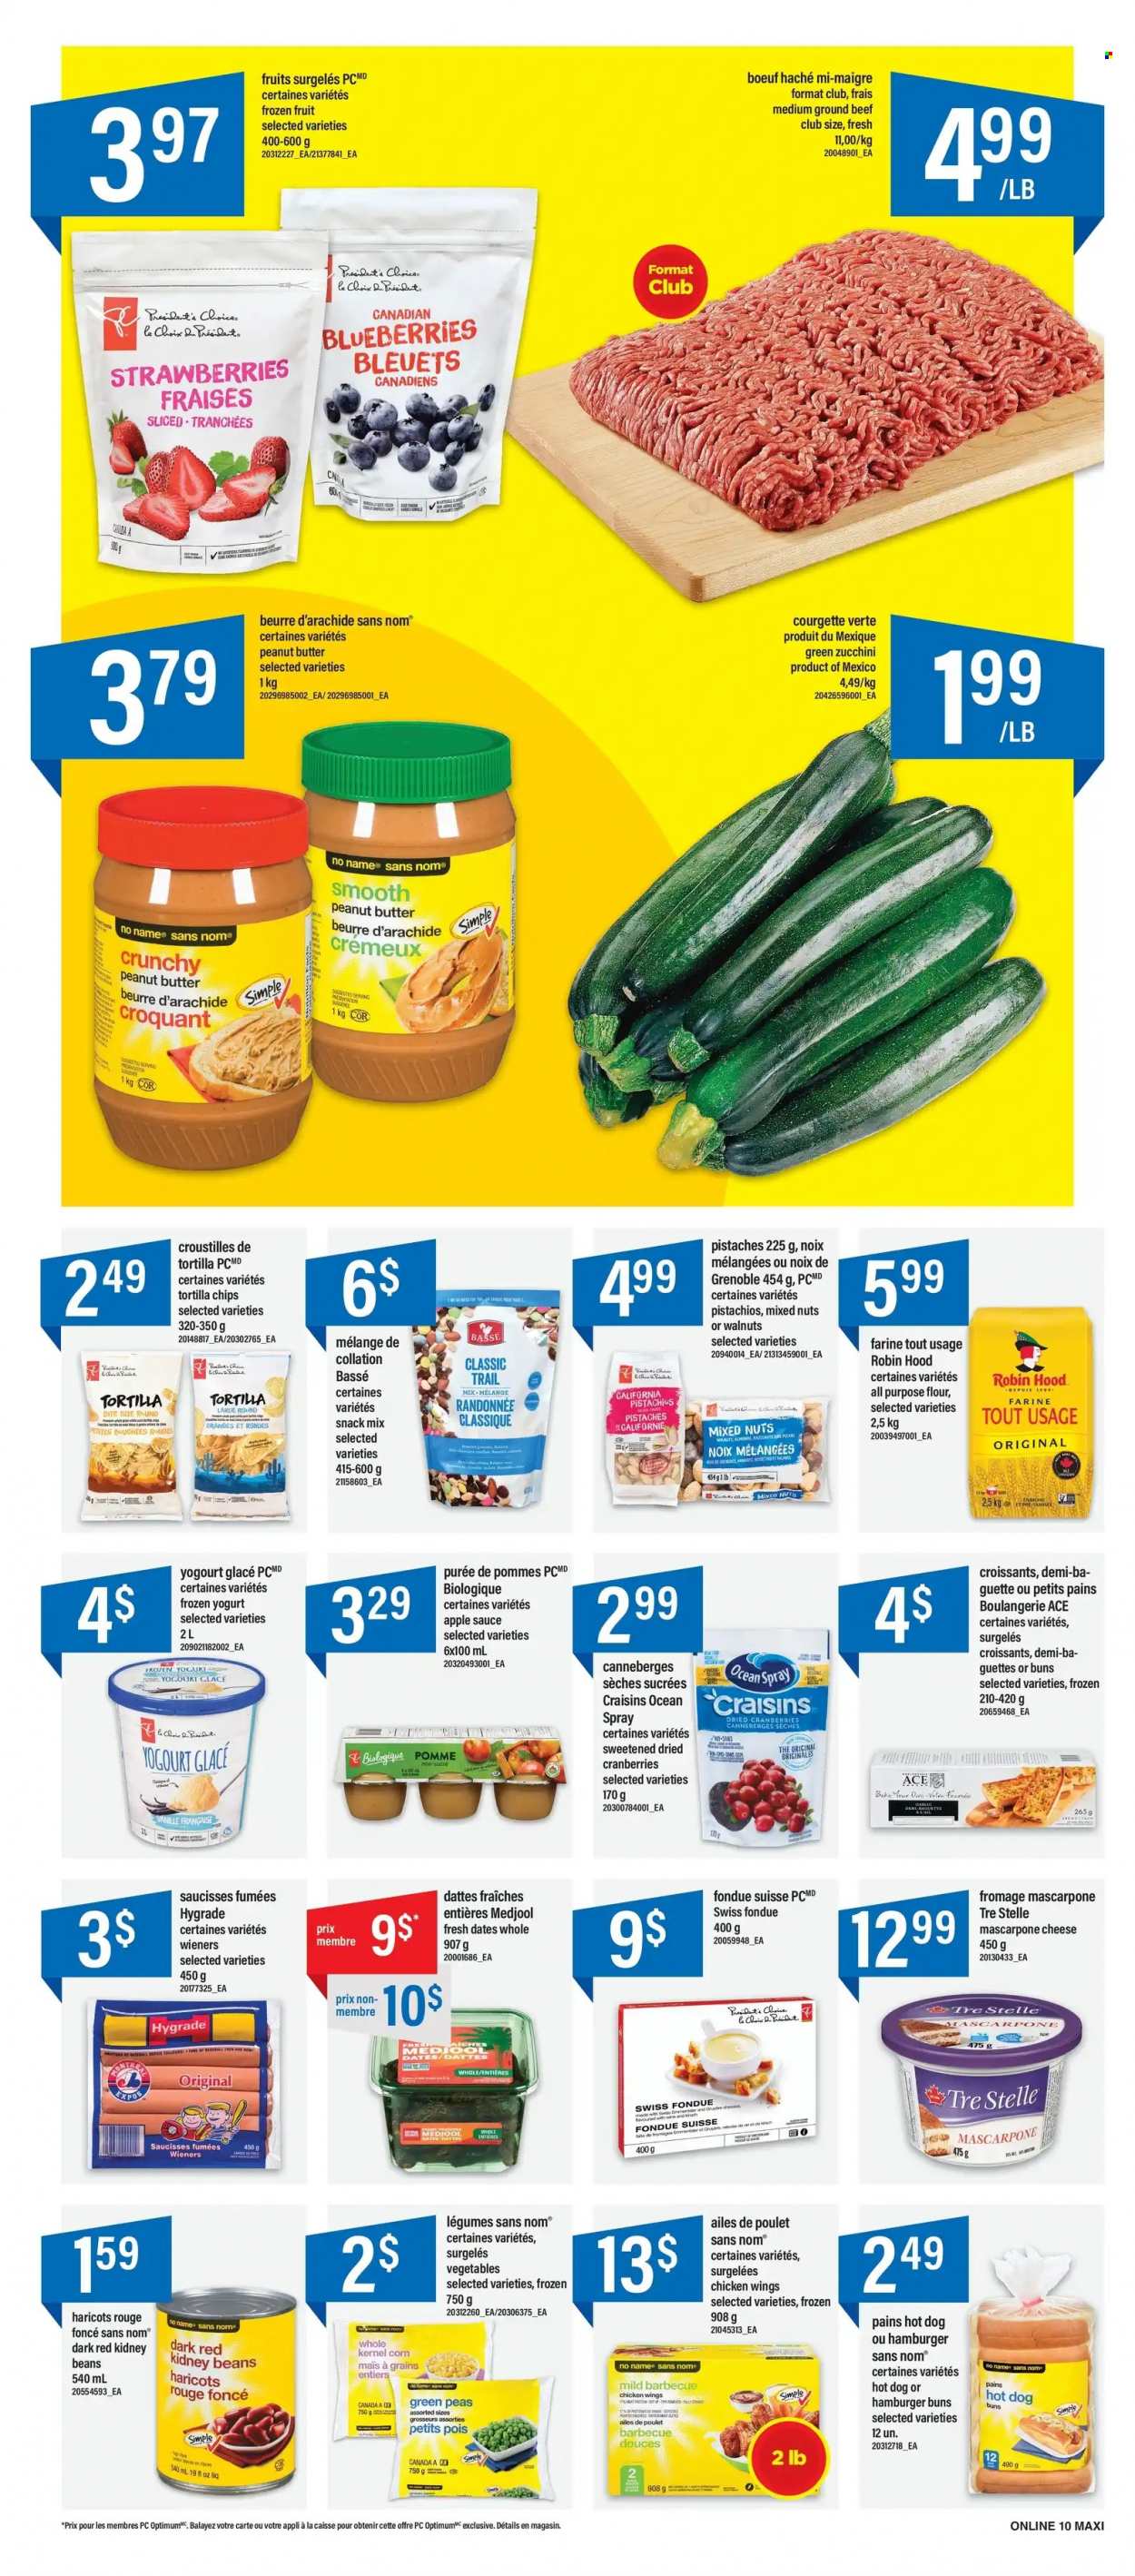 thumbnail - Maxi Flyer - December 01, 2022 - December 07, 2022 - Sales products - croissant, buns, burger buns, Ace, beans, corn, zucchini, peas, blueberries, fresh dates, No Name, sauce, Gruyere, cheese, Président, yoghurt, chicken wings, snack, tortilla chips, all purpose flour, craisins, cranberries, kidney beans, apple sauce, almonds, walnuts, dried fruit, pistachios, dried dates, mixed nuts, trail mix, Sol, beef meat, ground beef, mascarpone. Page 12.